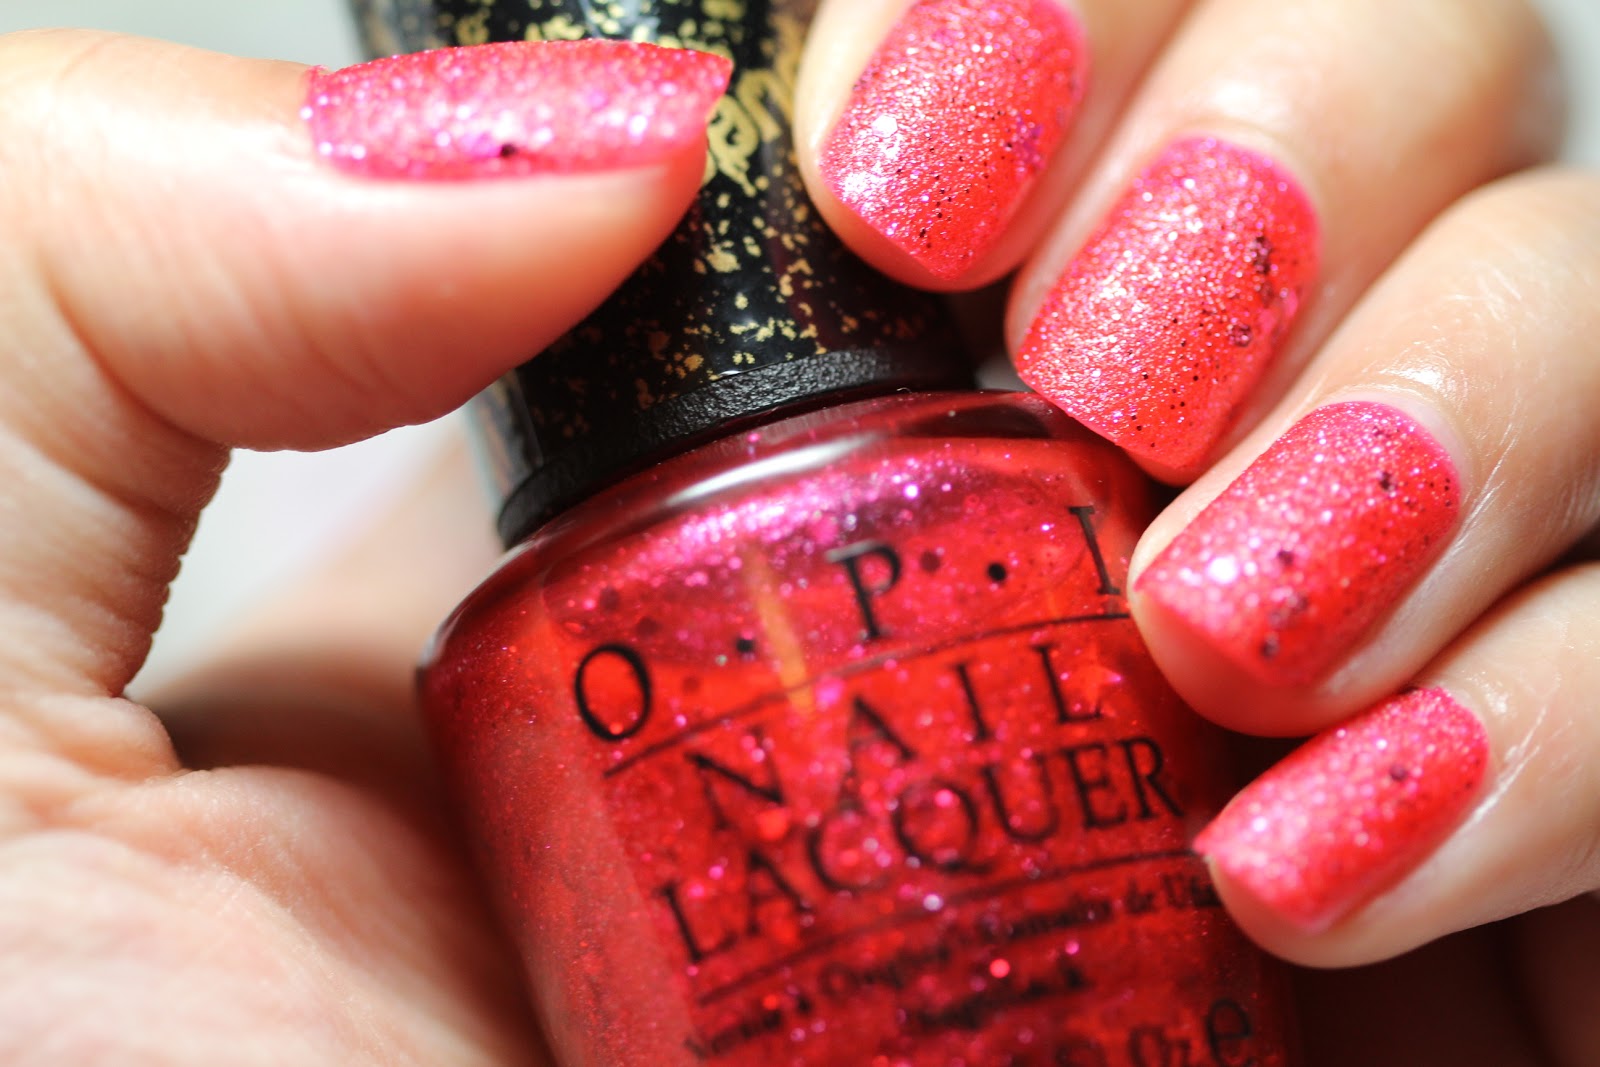 1. OPI Liquid Sand Nail Polish in "Can't Let Go" - wide 6